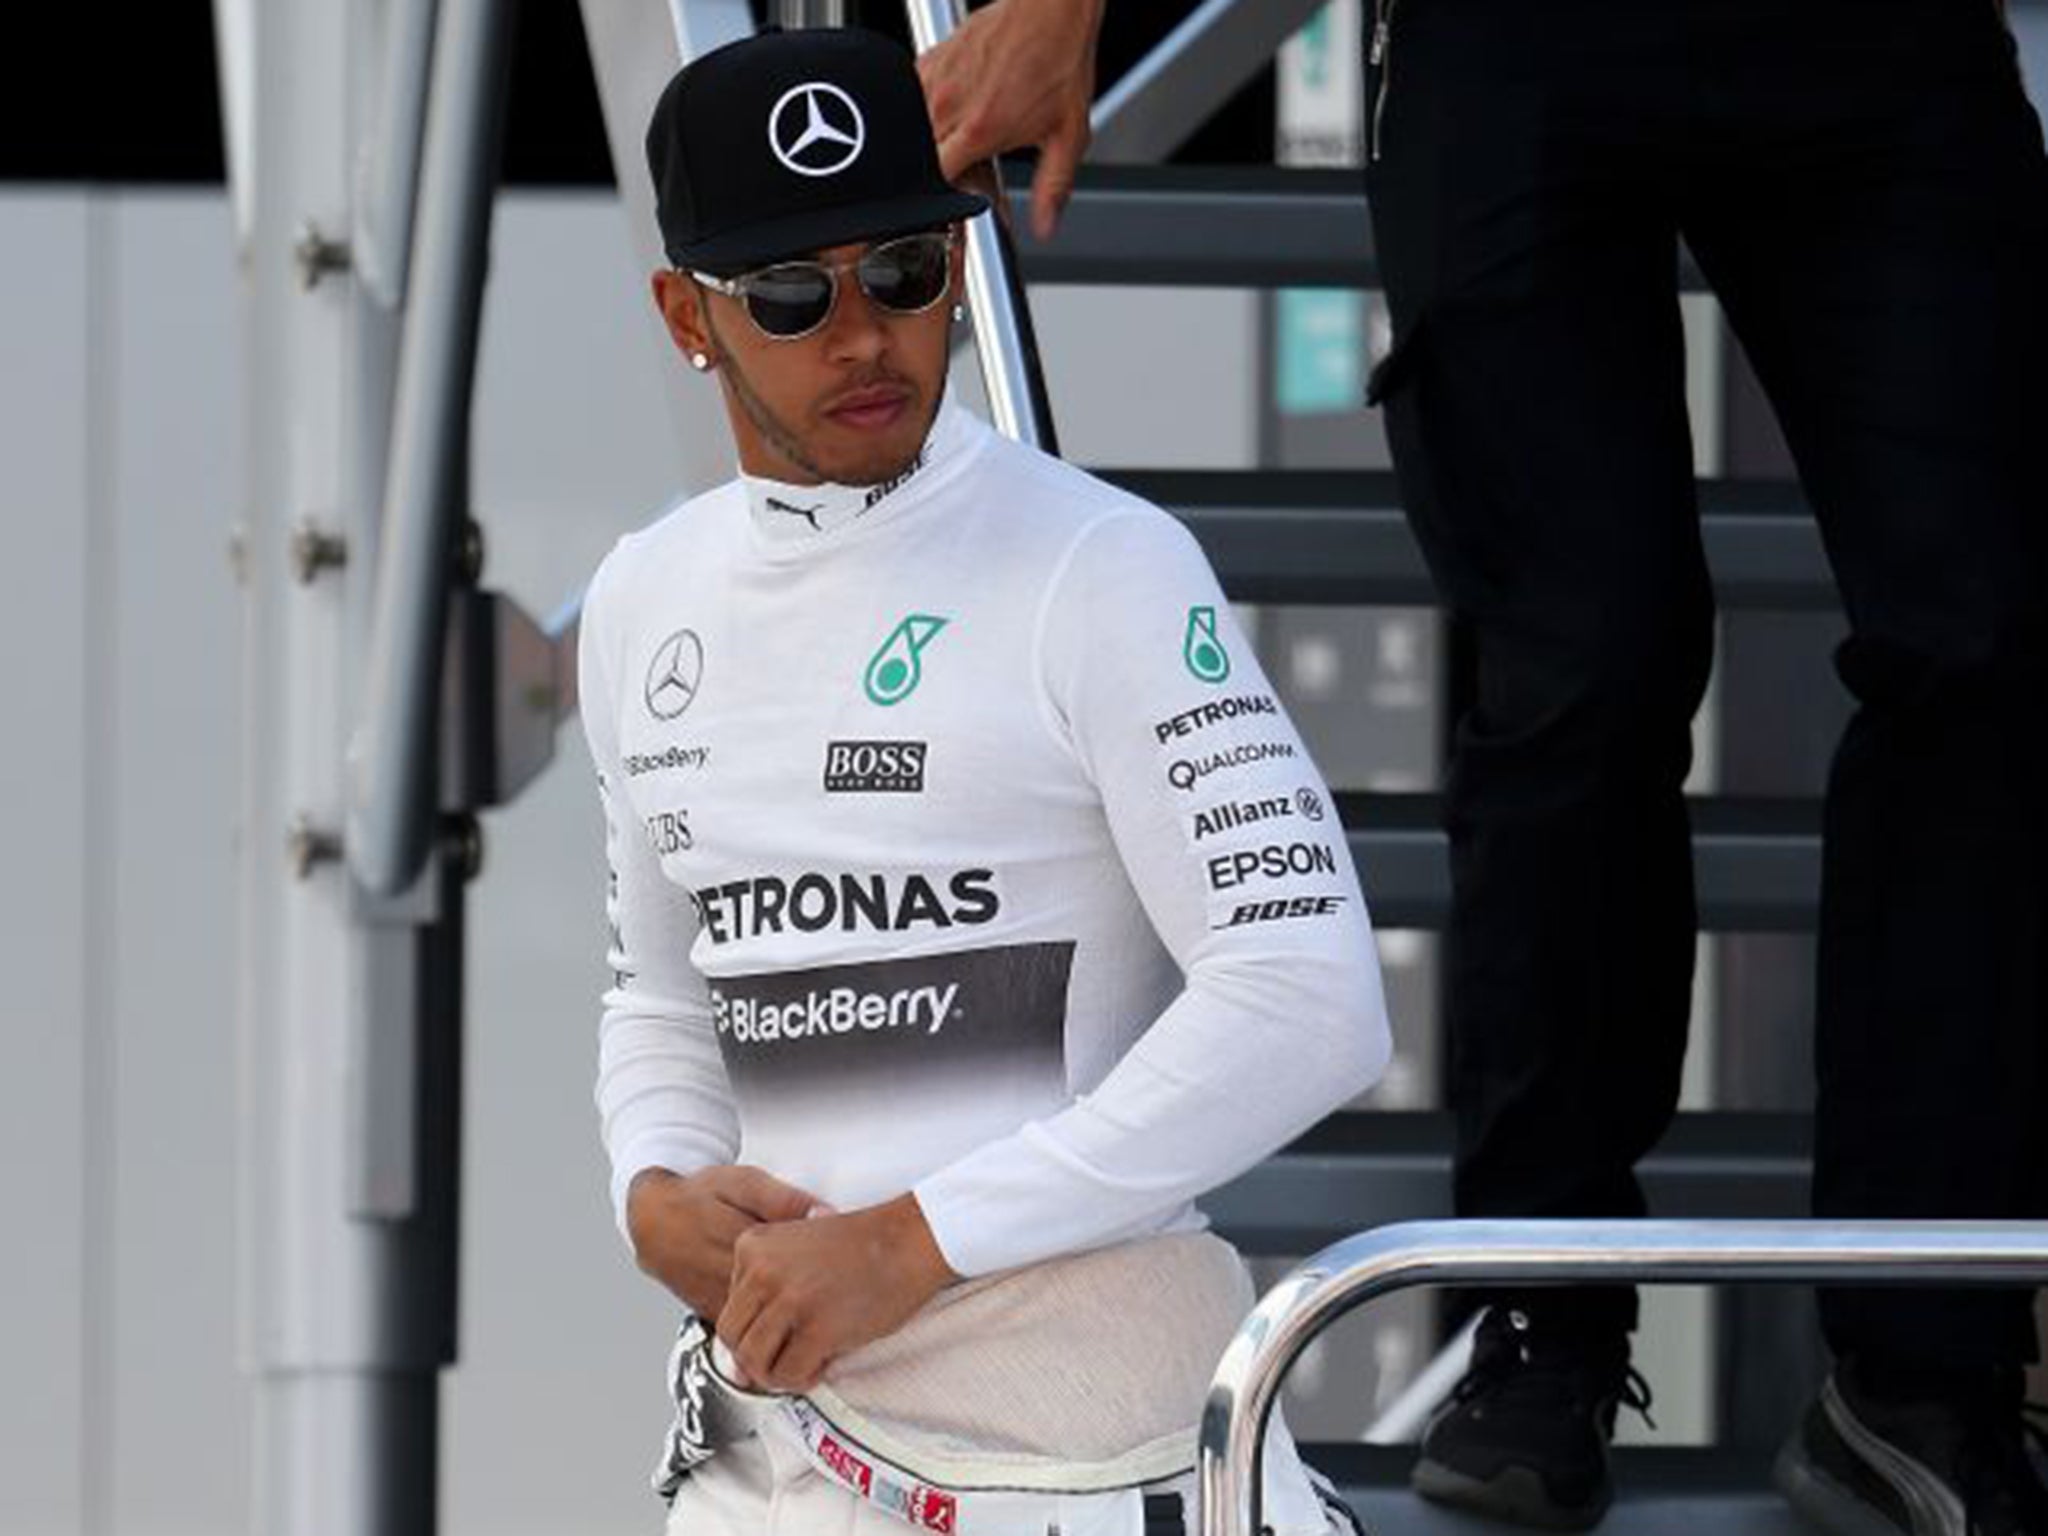 Lewis Hamilton, who leads the drivers’ title race from Nico Rosberg, was fourth in practice yesterday at Silverstone